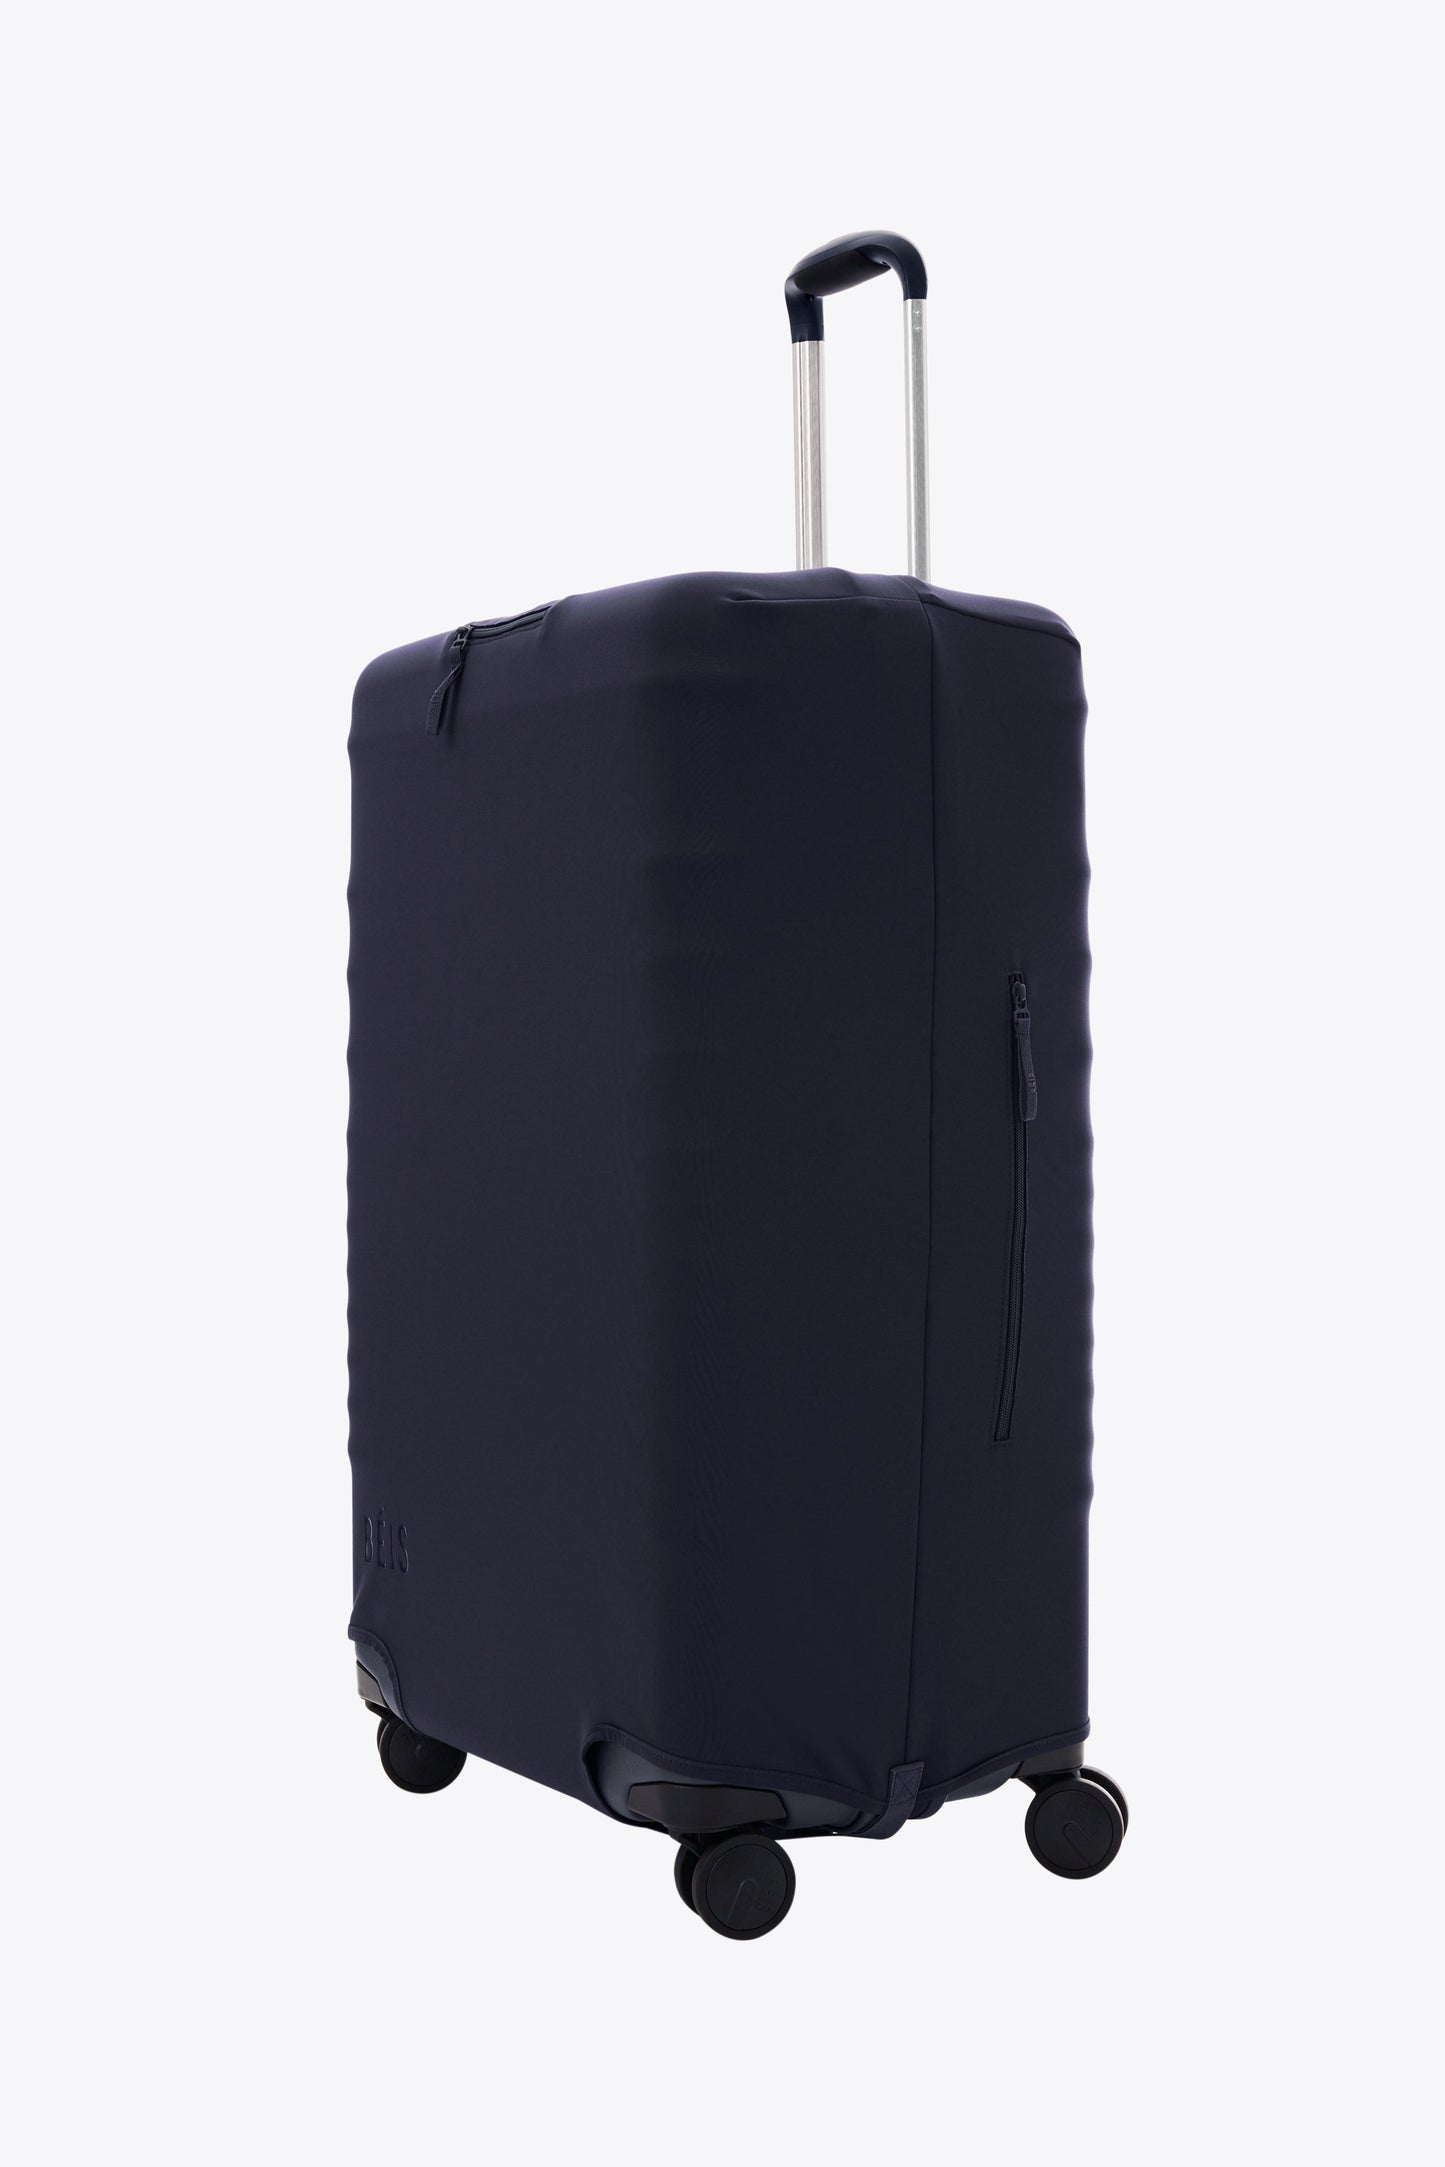 The Large Check-In Luggage Cover in Navy